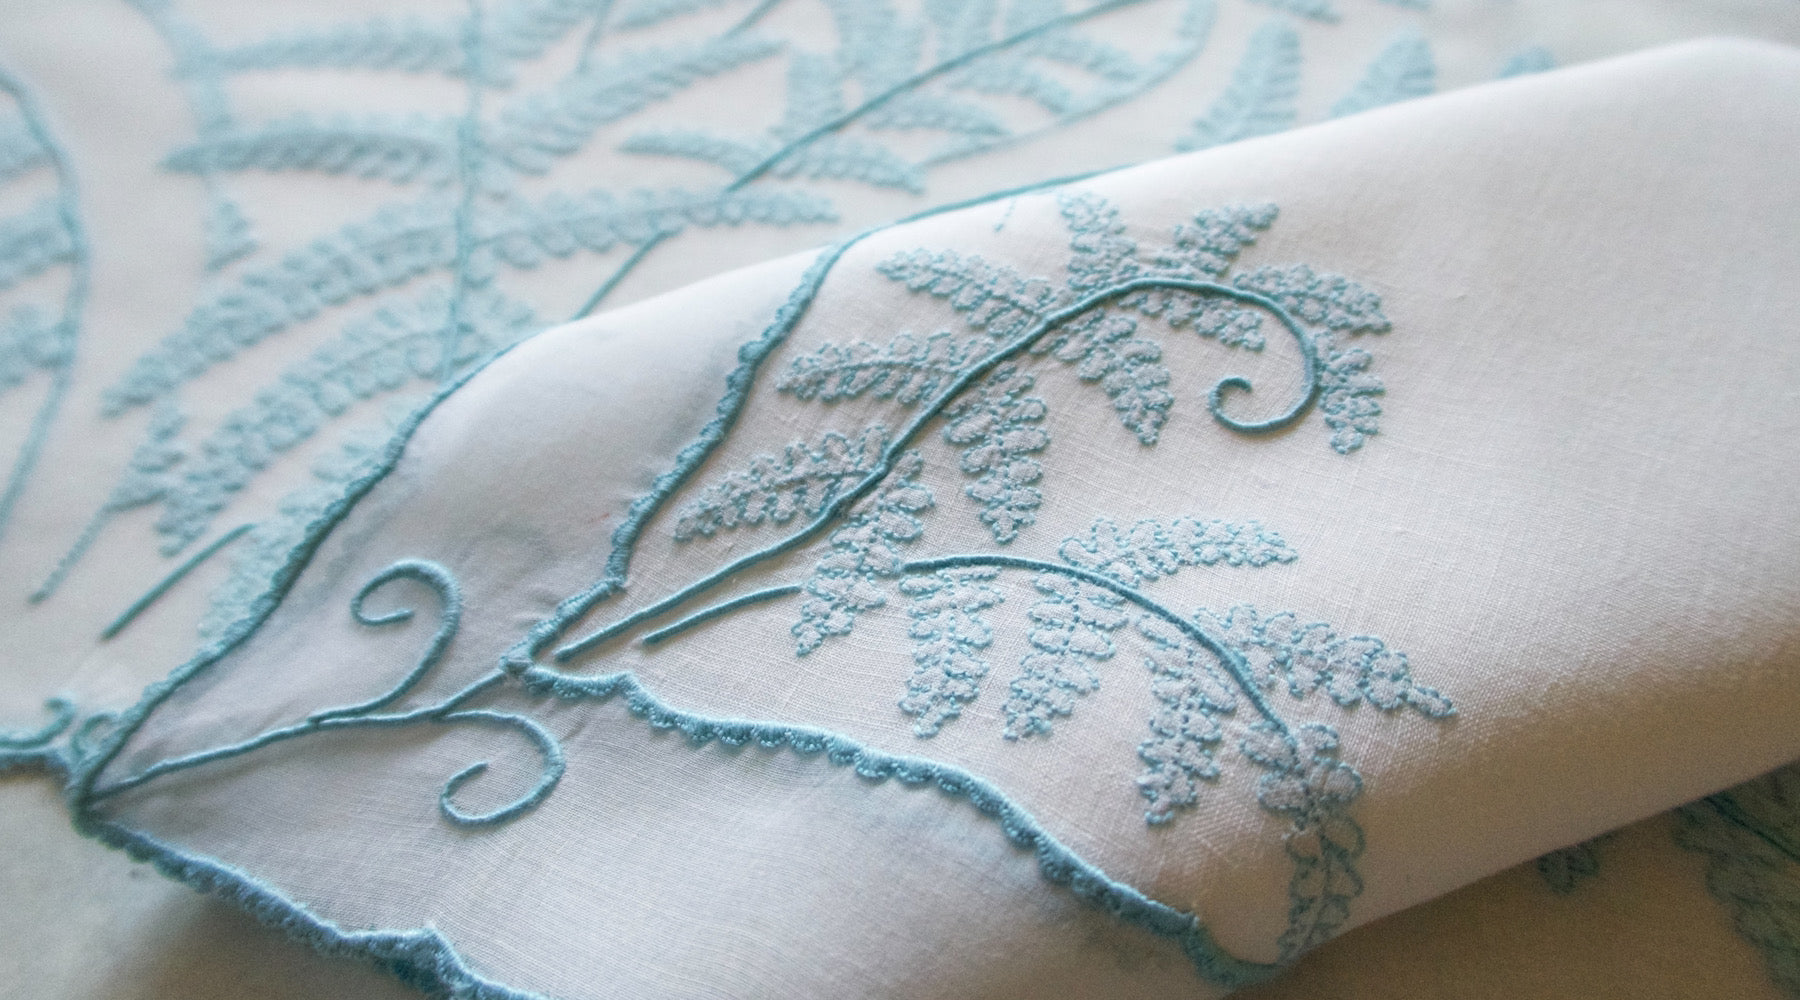 Fine vintage table linens are better and more beautiful than today’s